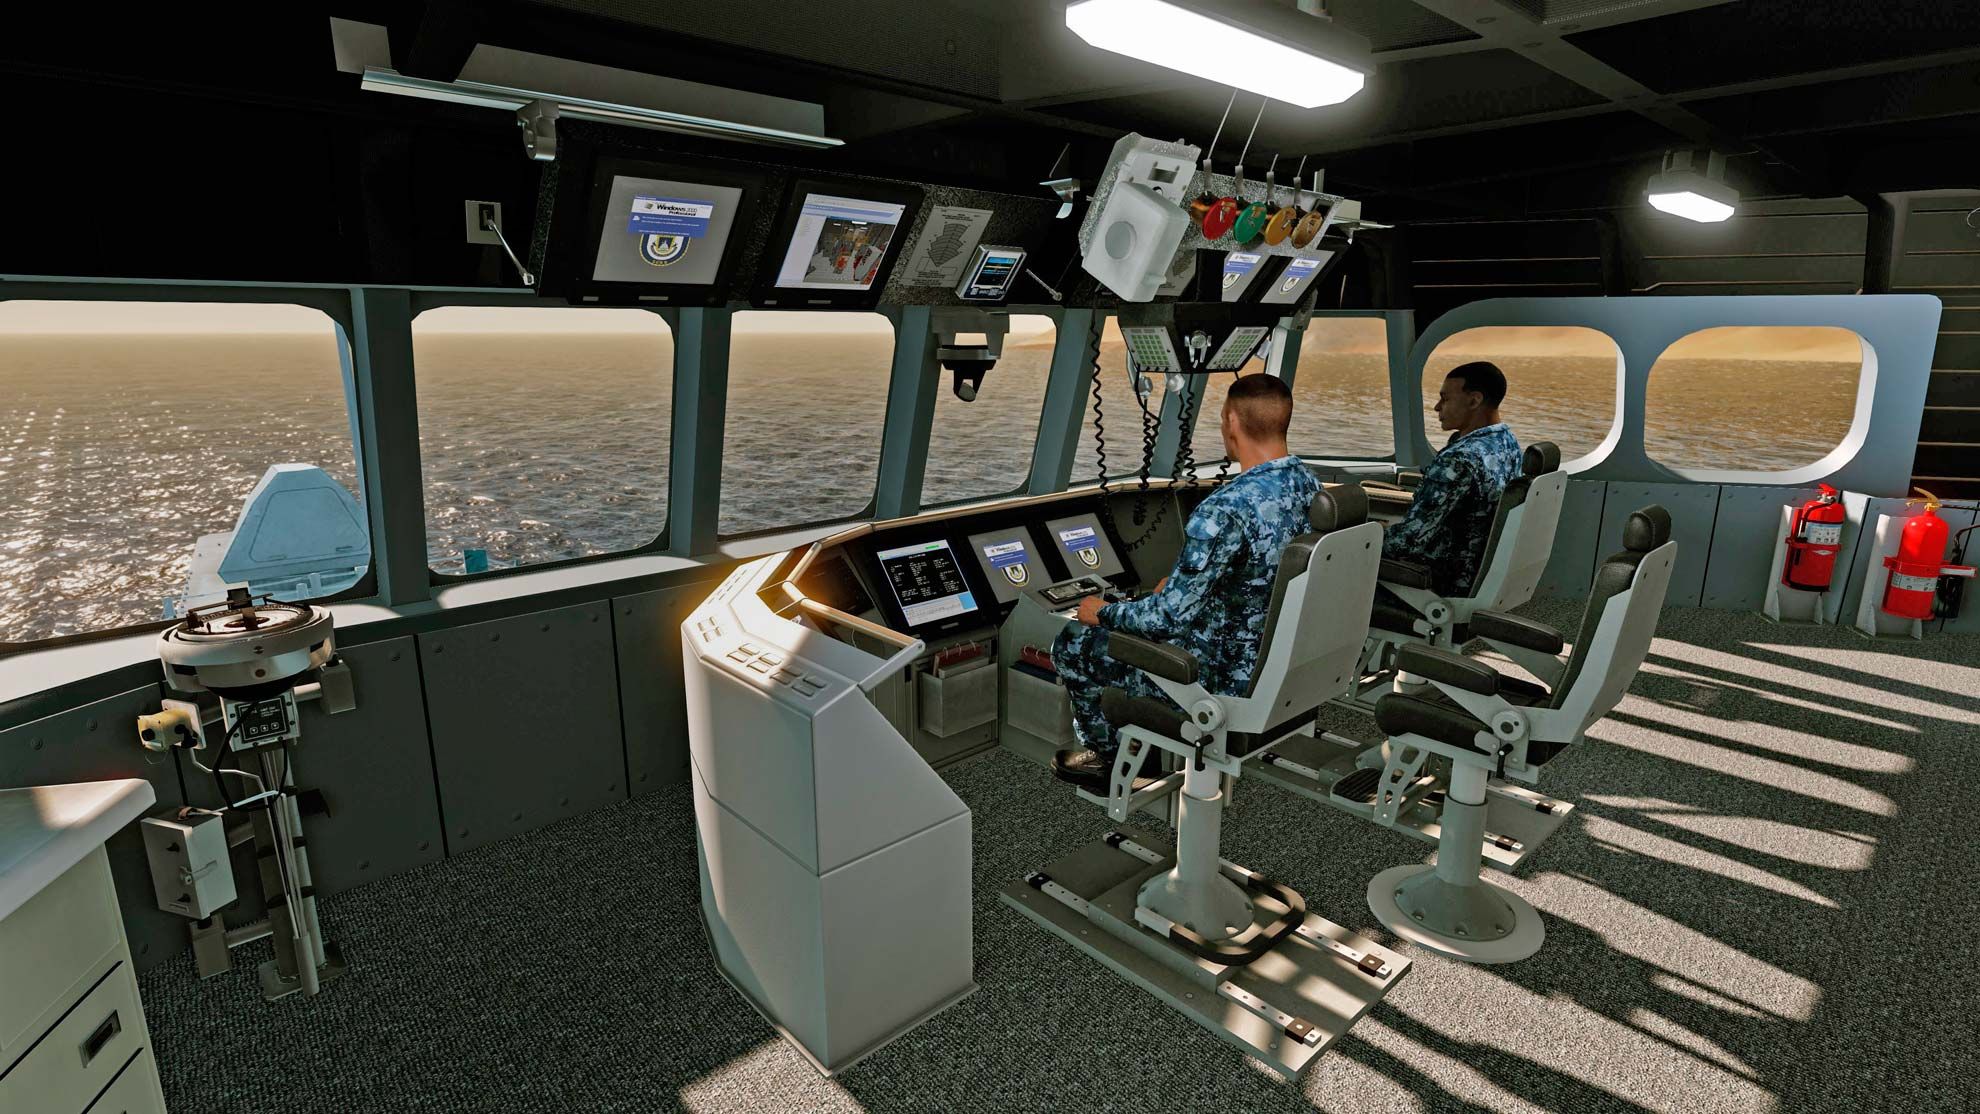 The Navy is the leading practitioner of live, virtual, and constructive training in the DoD, and HII has a strong history of developing LVC solutions in support of the Navy. (Image courtesy of HII).